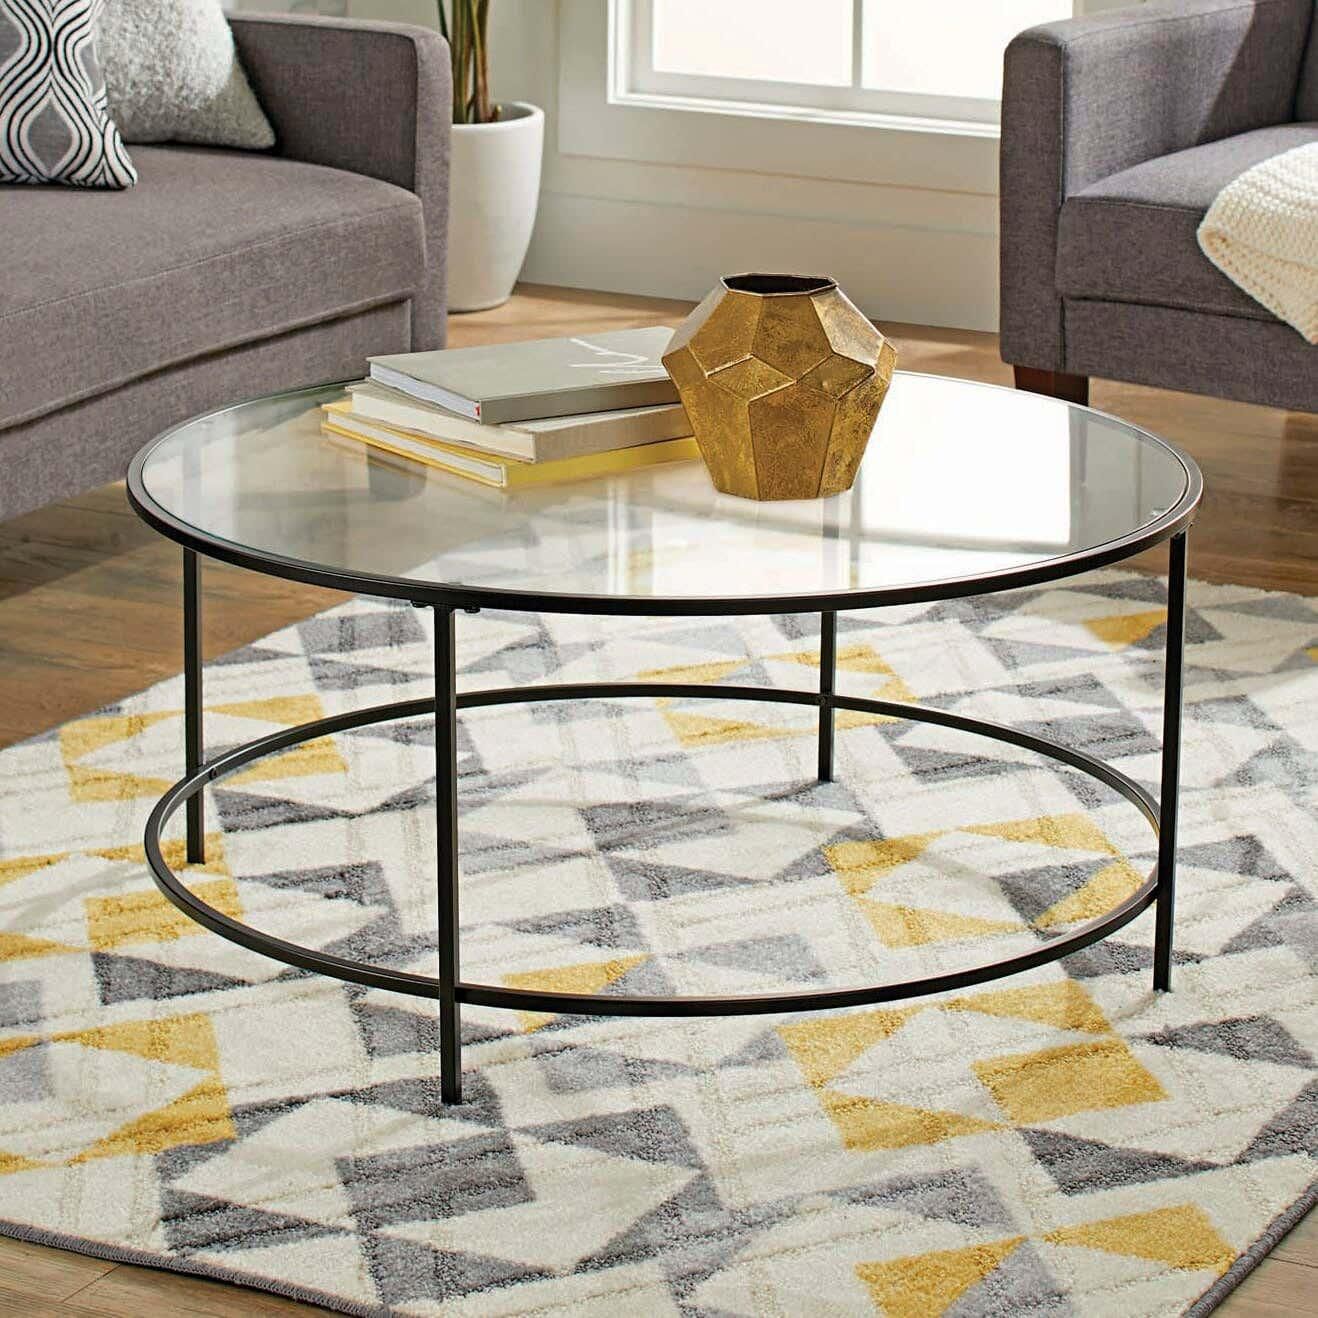 Get Steel Modern Center Table, Glass Surface, 45× 80 cm - Black Clear with best offers | Raneen.com